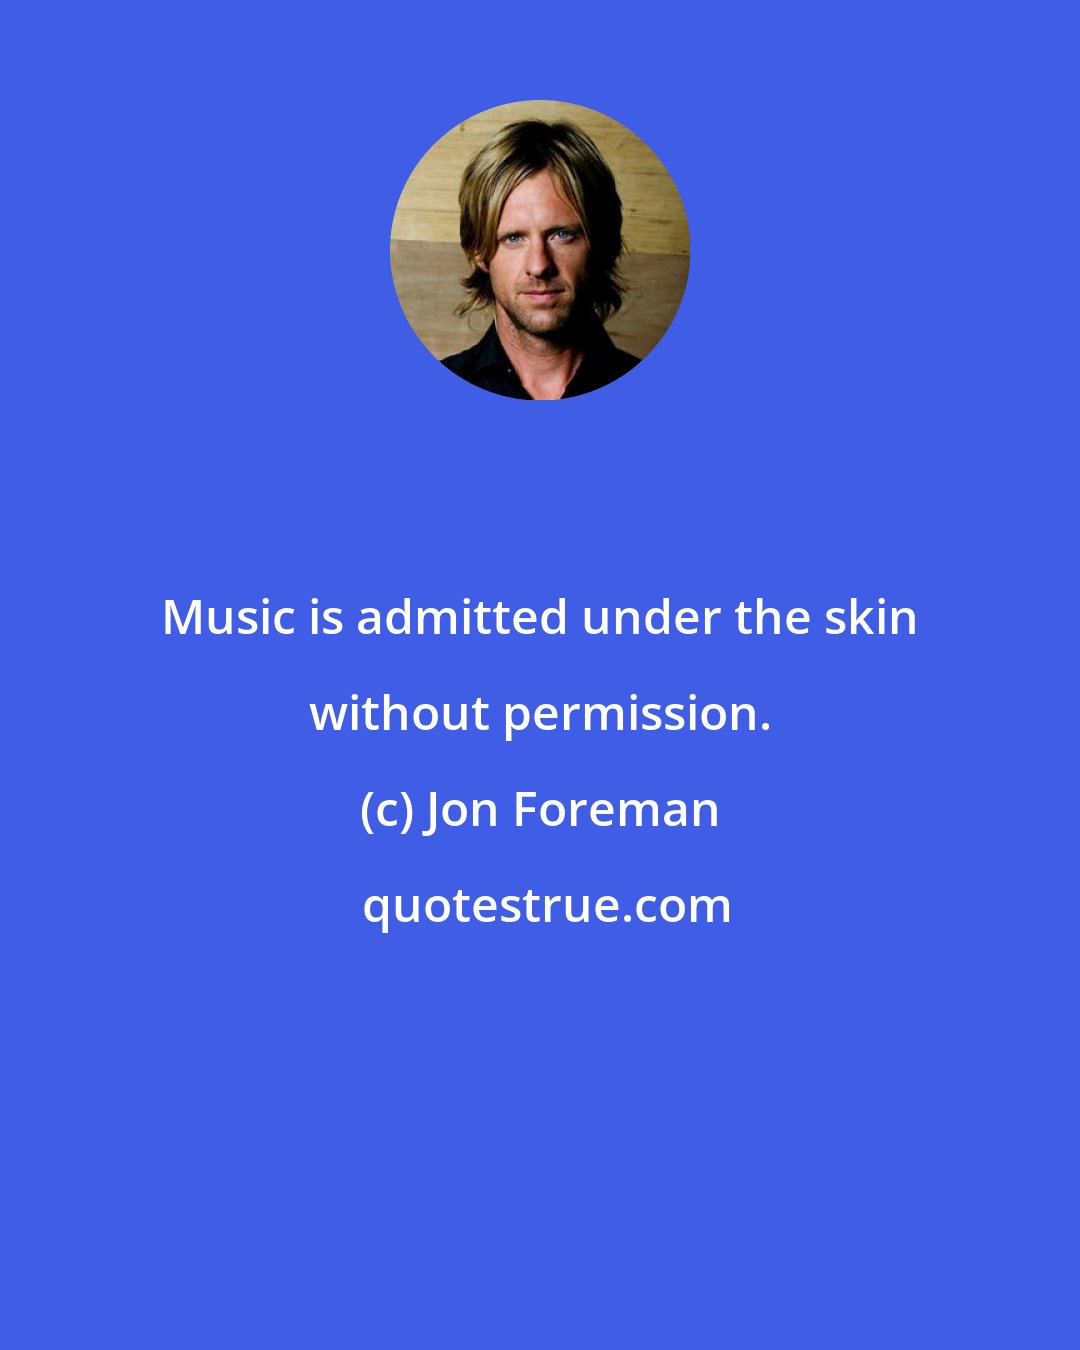 Jon Foreman: Music is admitted under the skin without permission.